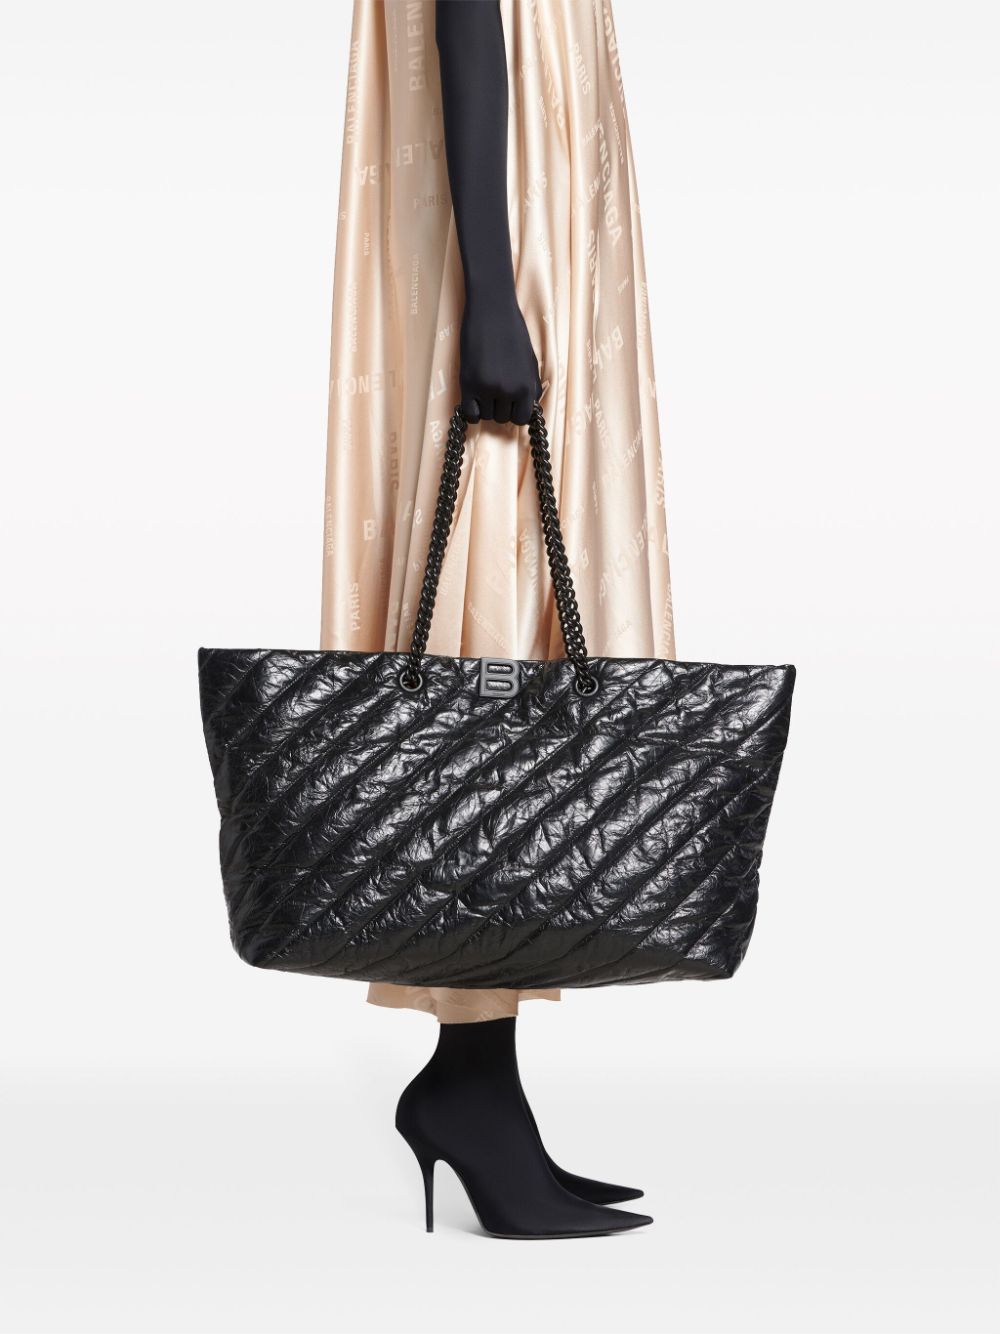 BALENCIAGA Black Quilted Leather Tote with Metallic Detail, Two Chain Handles and Internal Zippered Pocket for Women